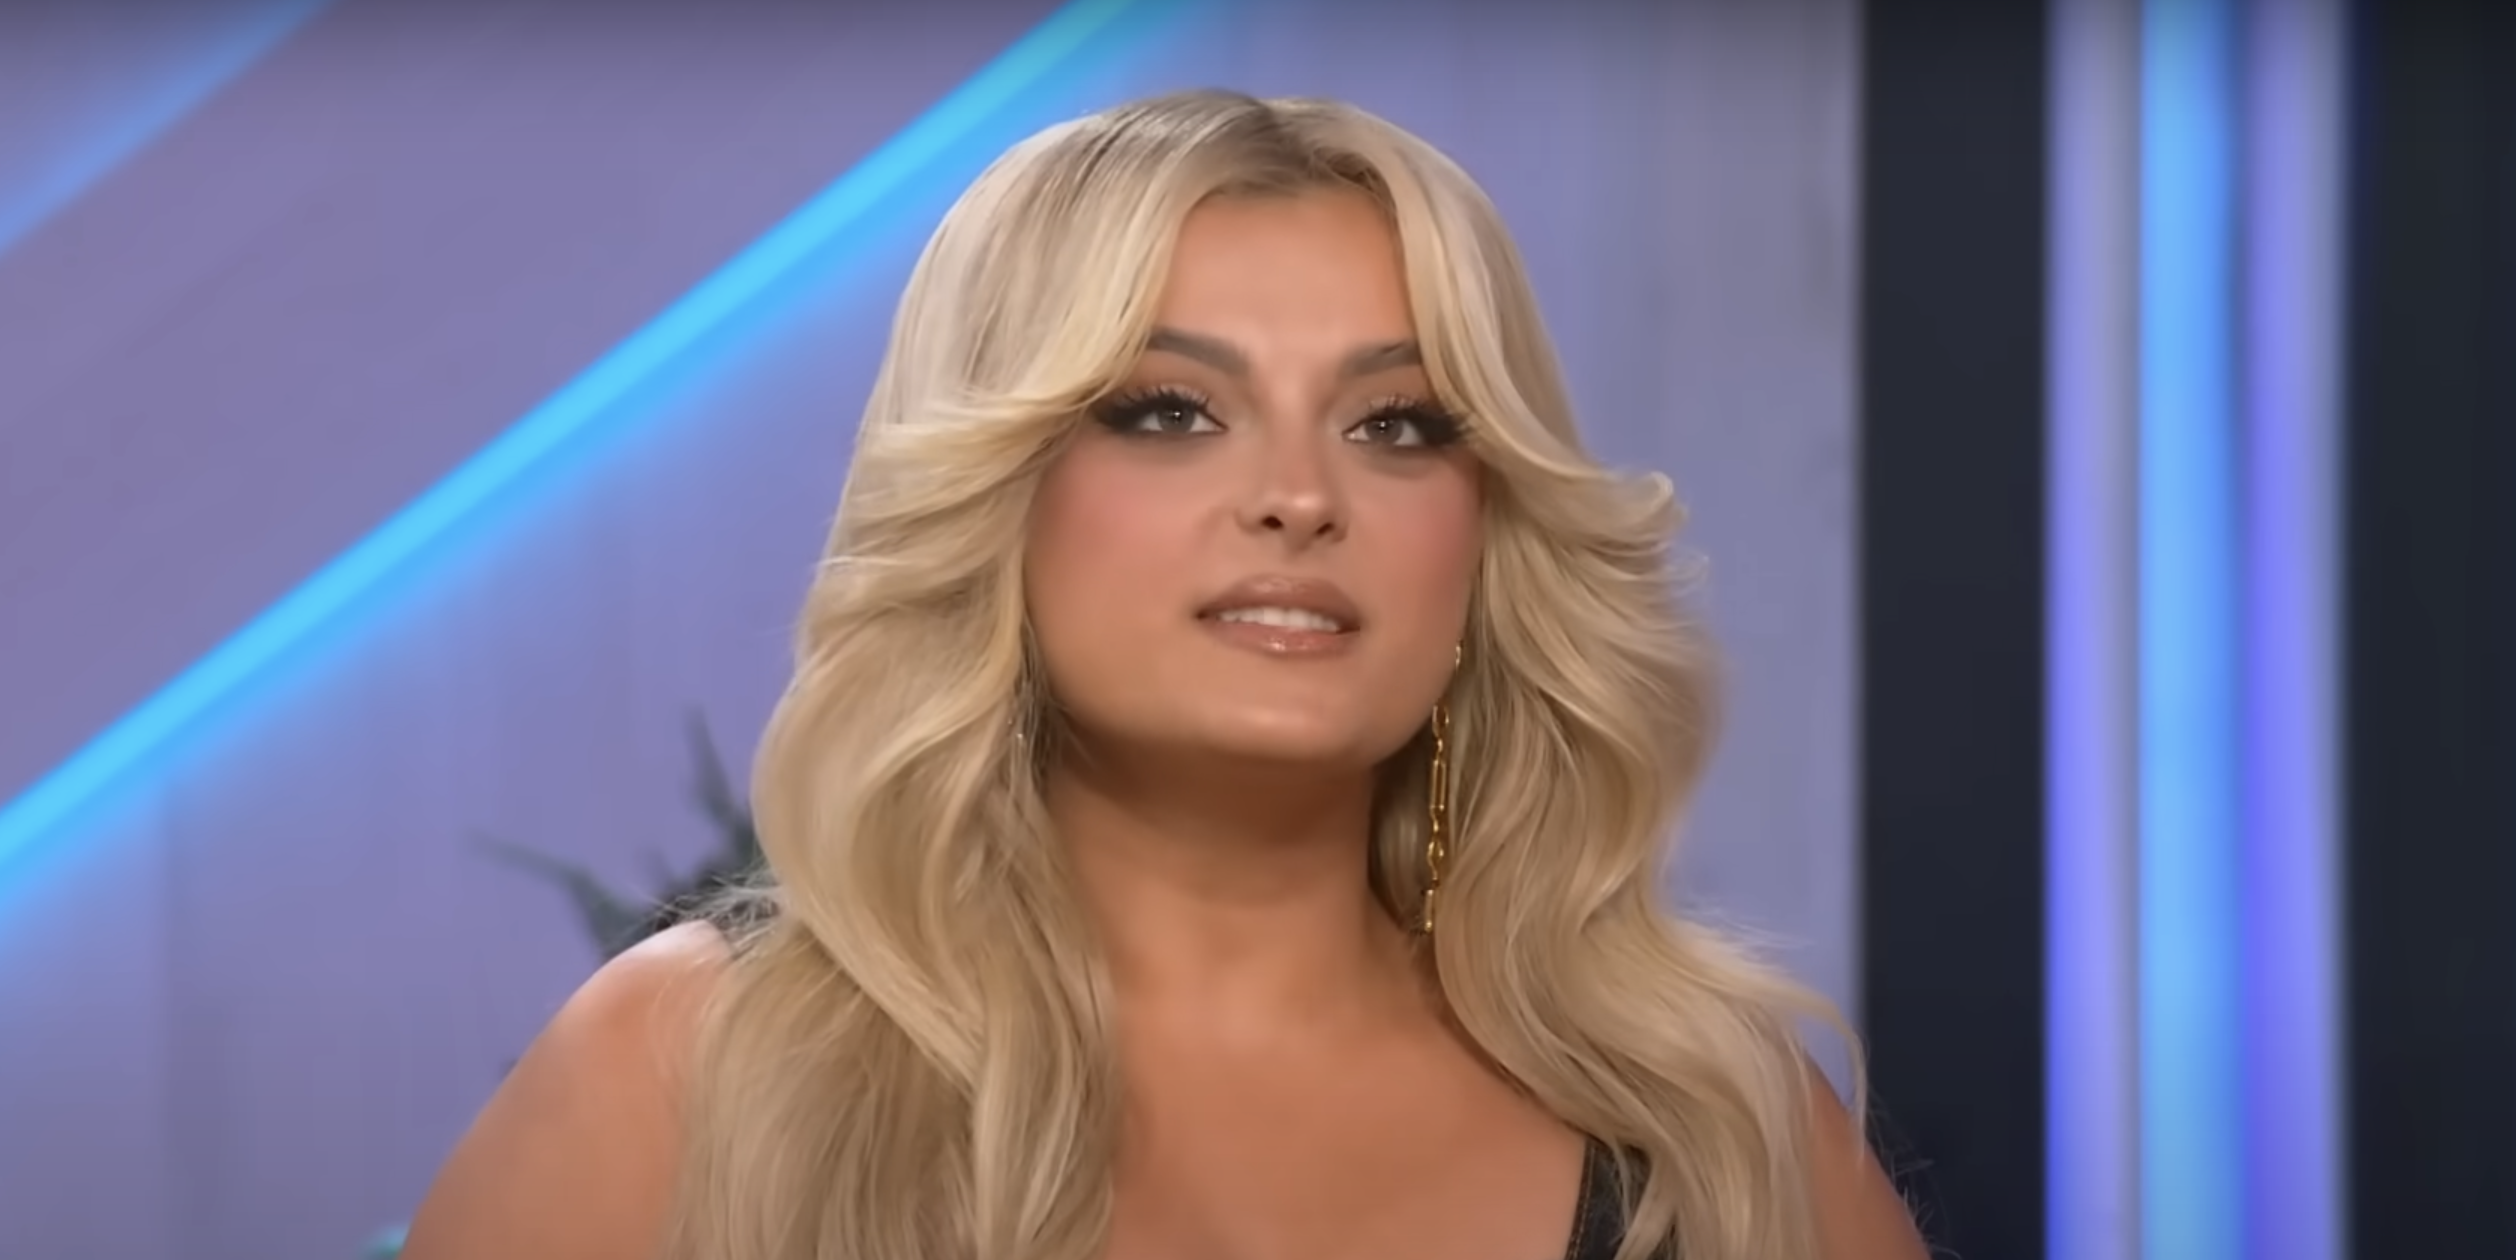 Bebe Rexha Says She Can ‘Bring Down’ Music Industry With What She Knows